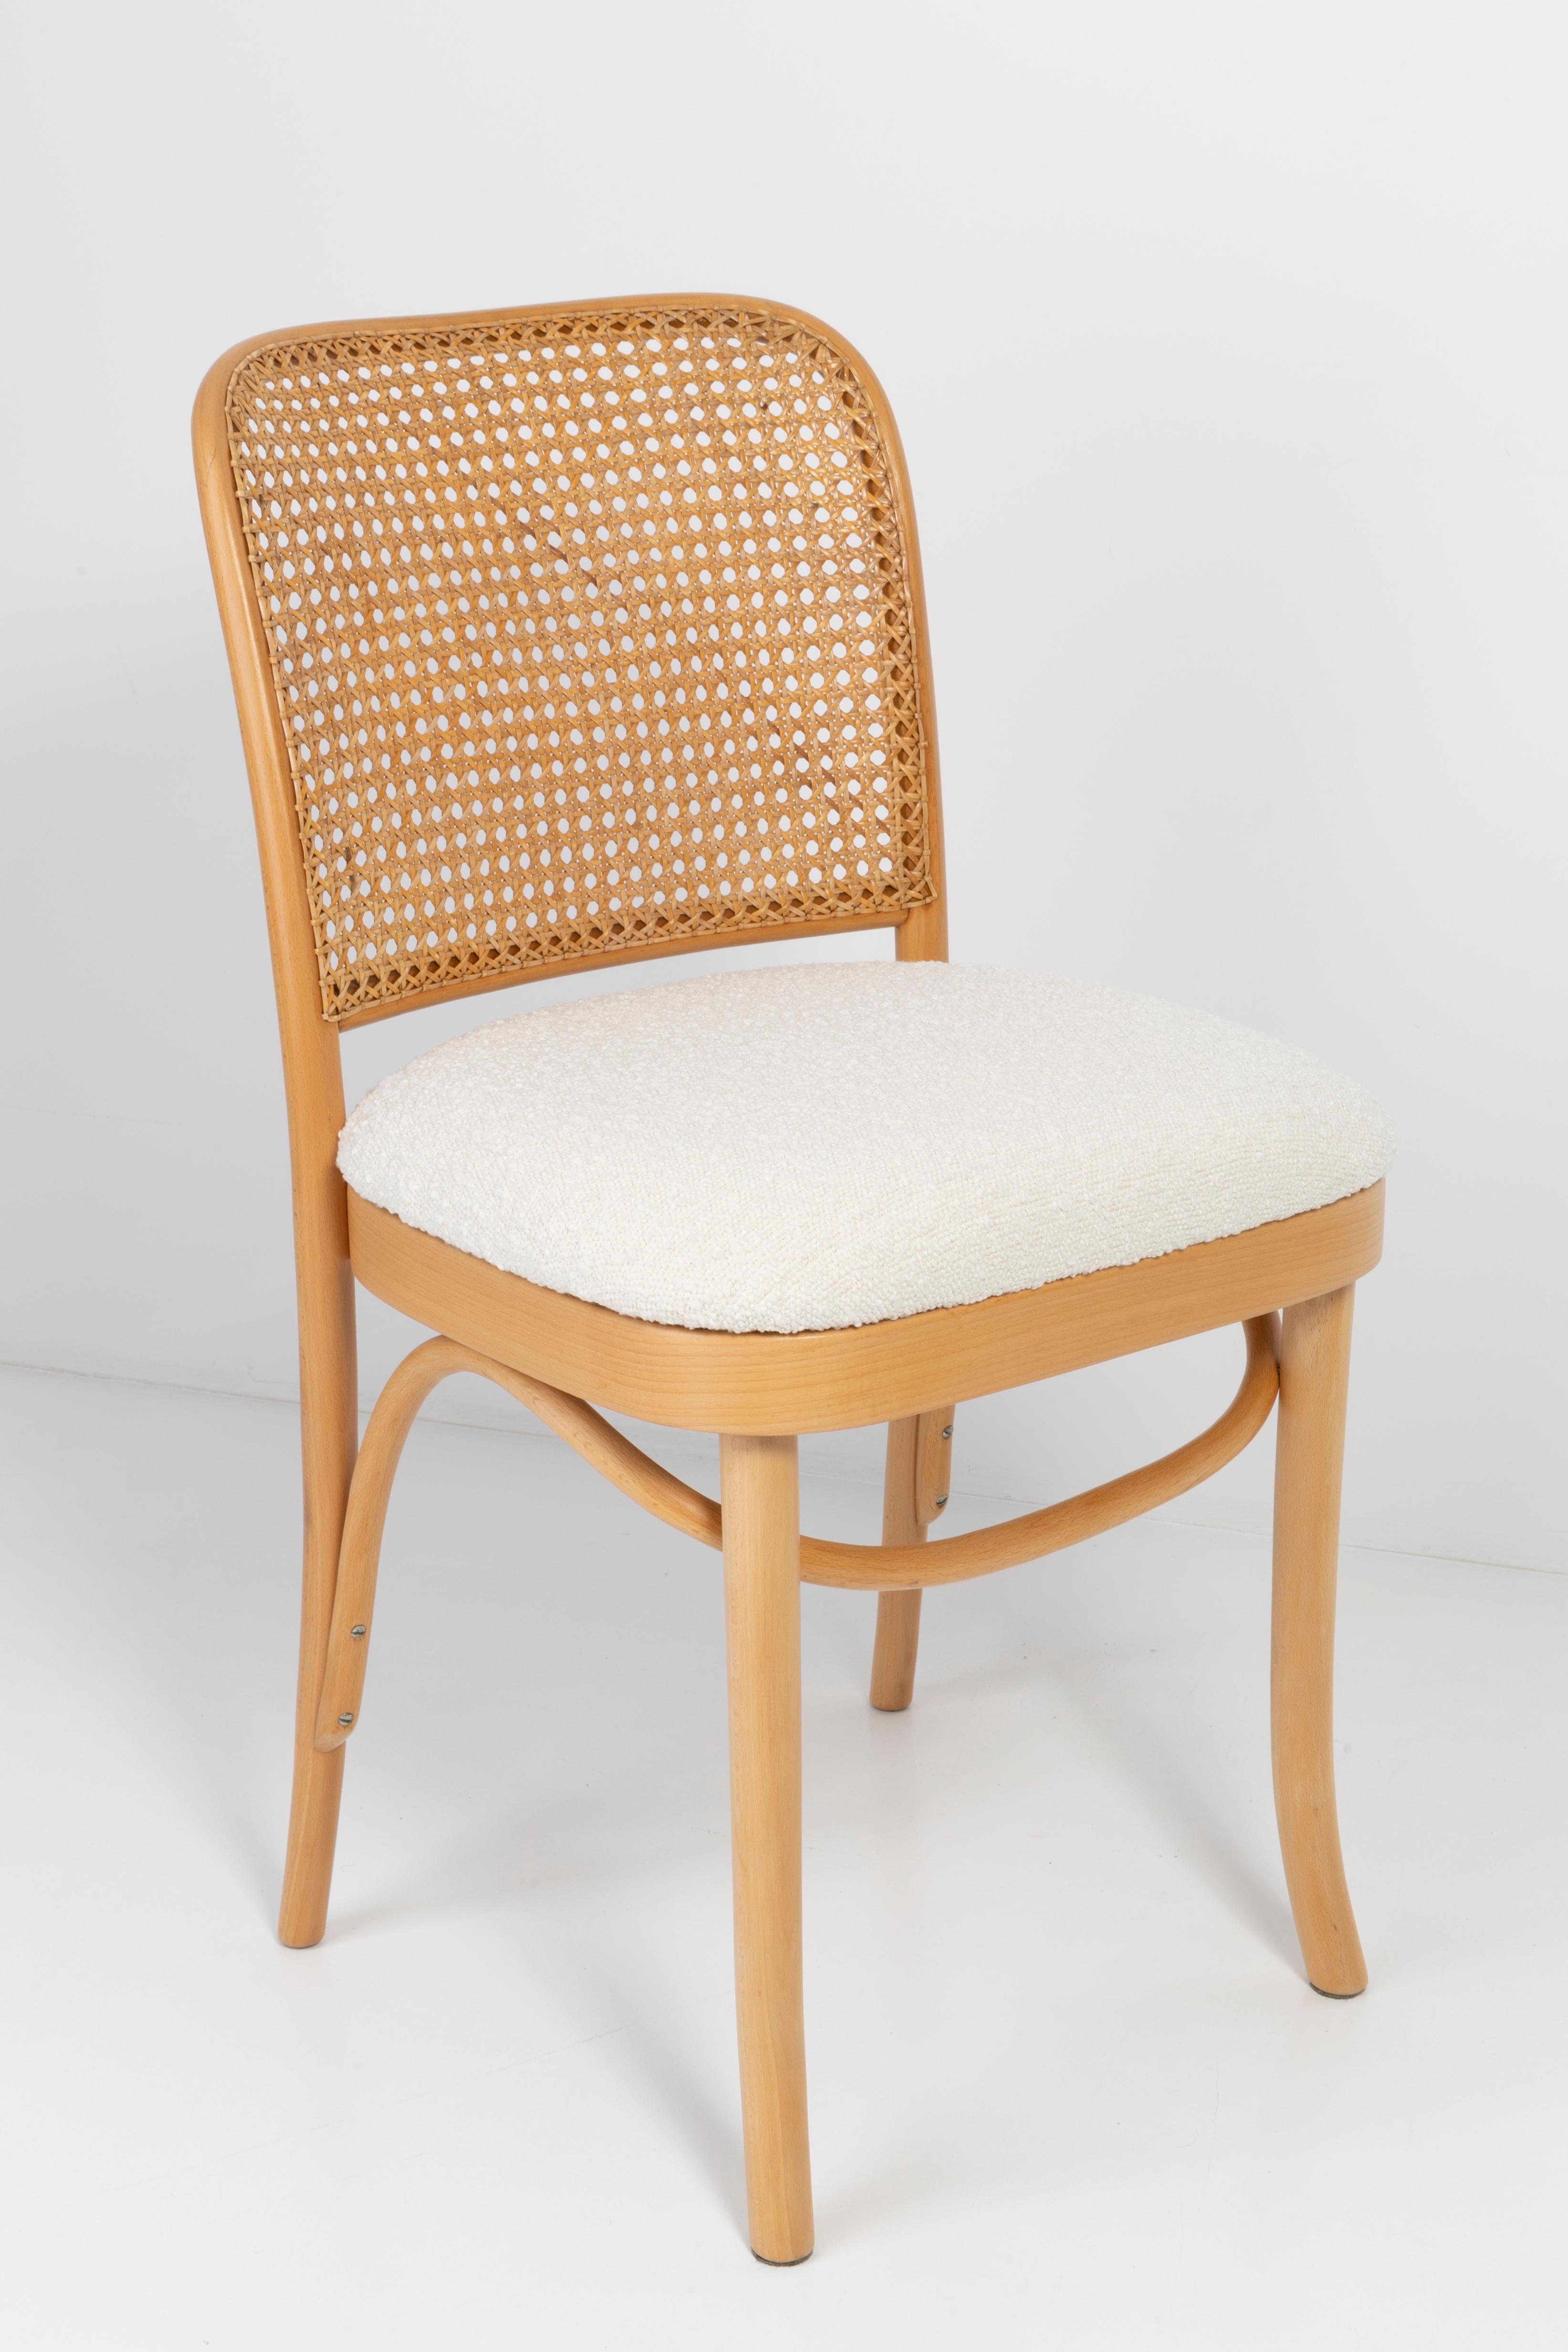 Set of Eight White Boucle Thonet Wood Rattan Chairs, 1960s In Excellent Condition For Sale In 05-080 Hornowek, PL